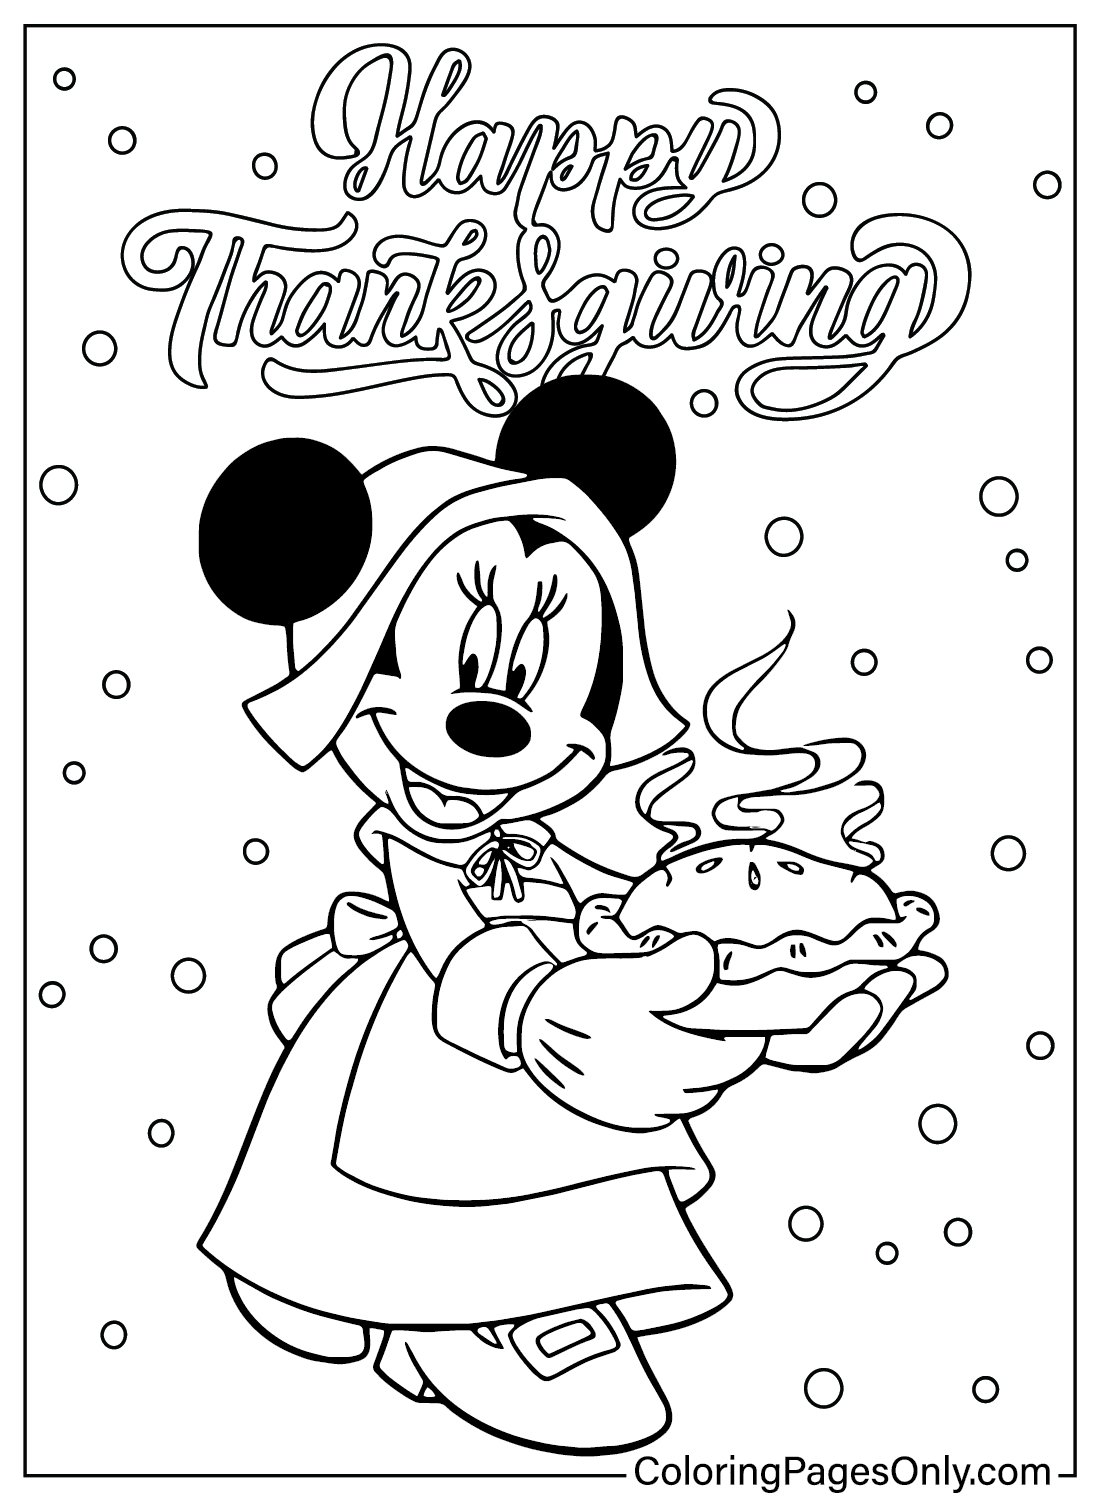 Disney Minnie Thanksgiving Coloring Page from Disney Thanksgiving